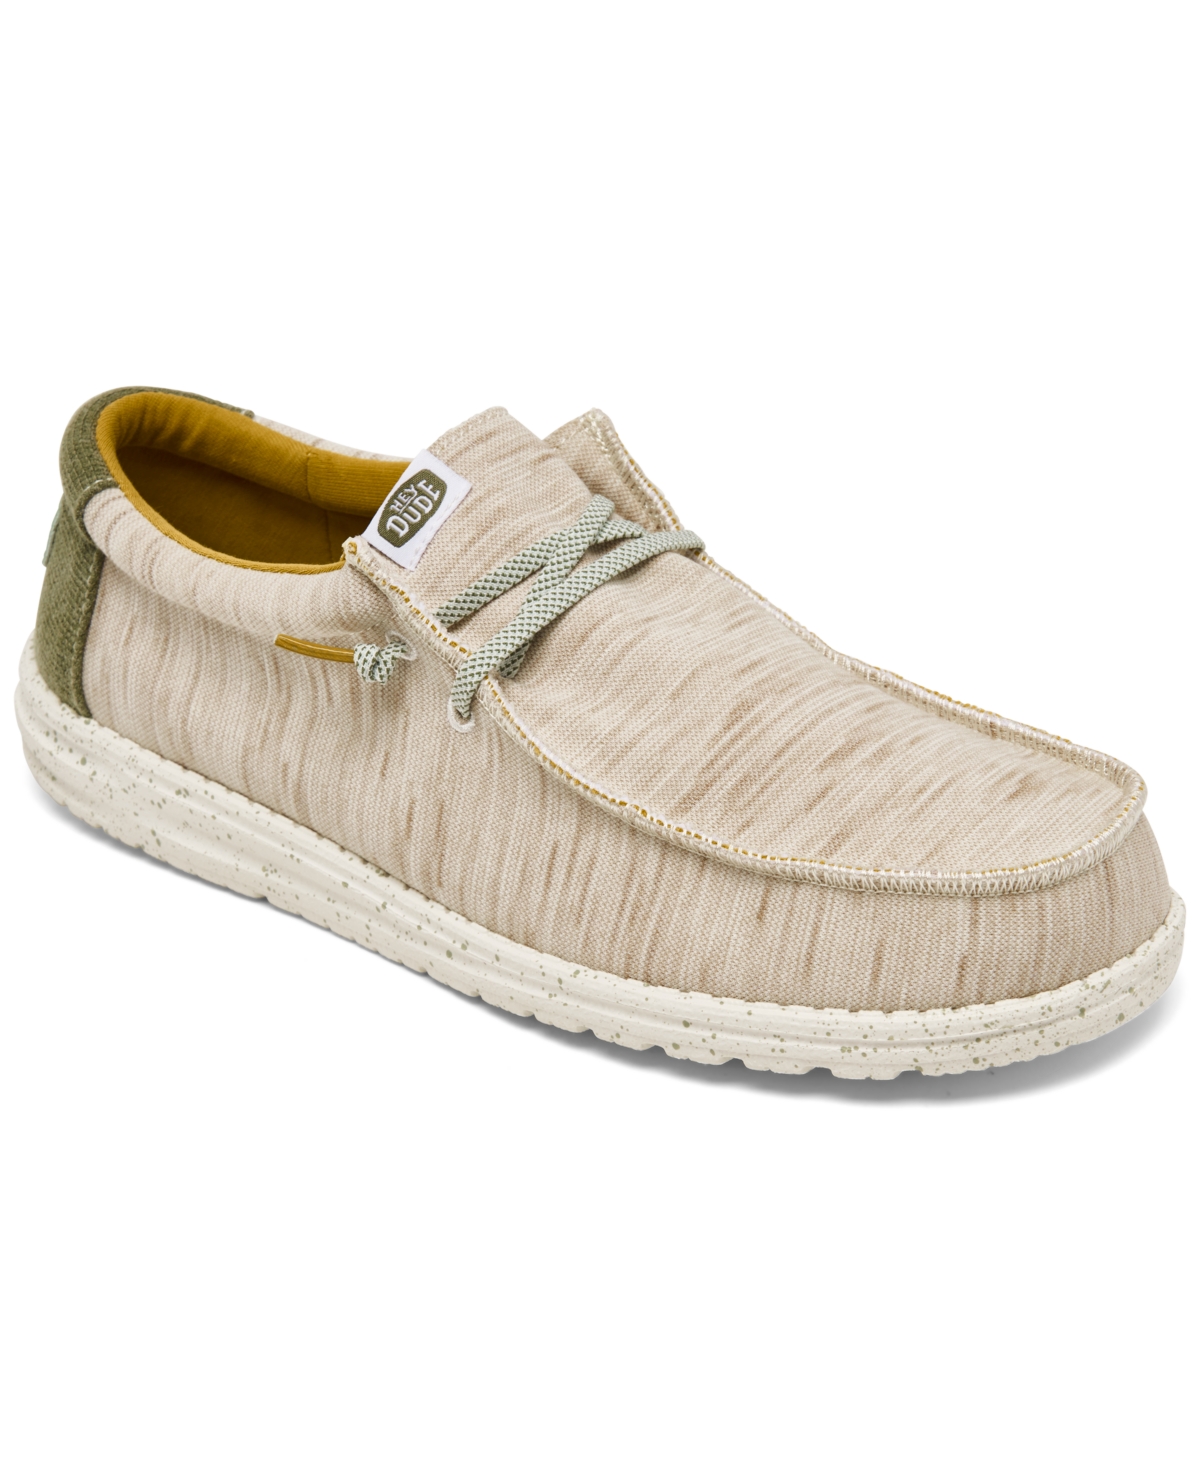 Men's Wally Jersey Casual Moccasin Sneakers from Finish Line - Taupe